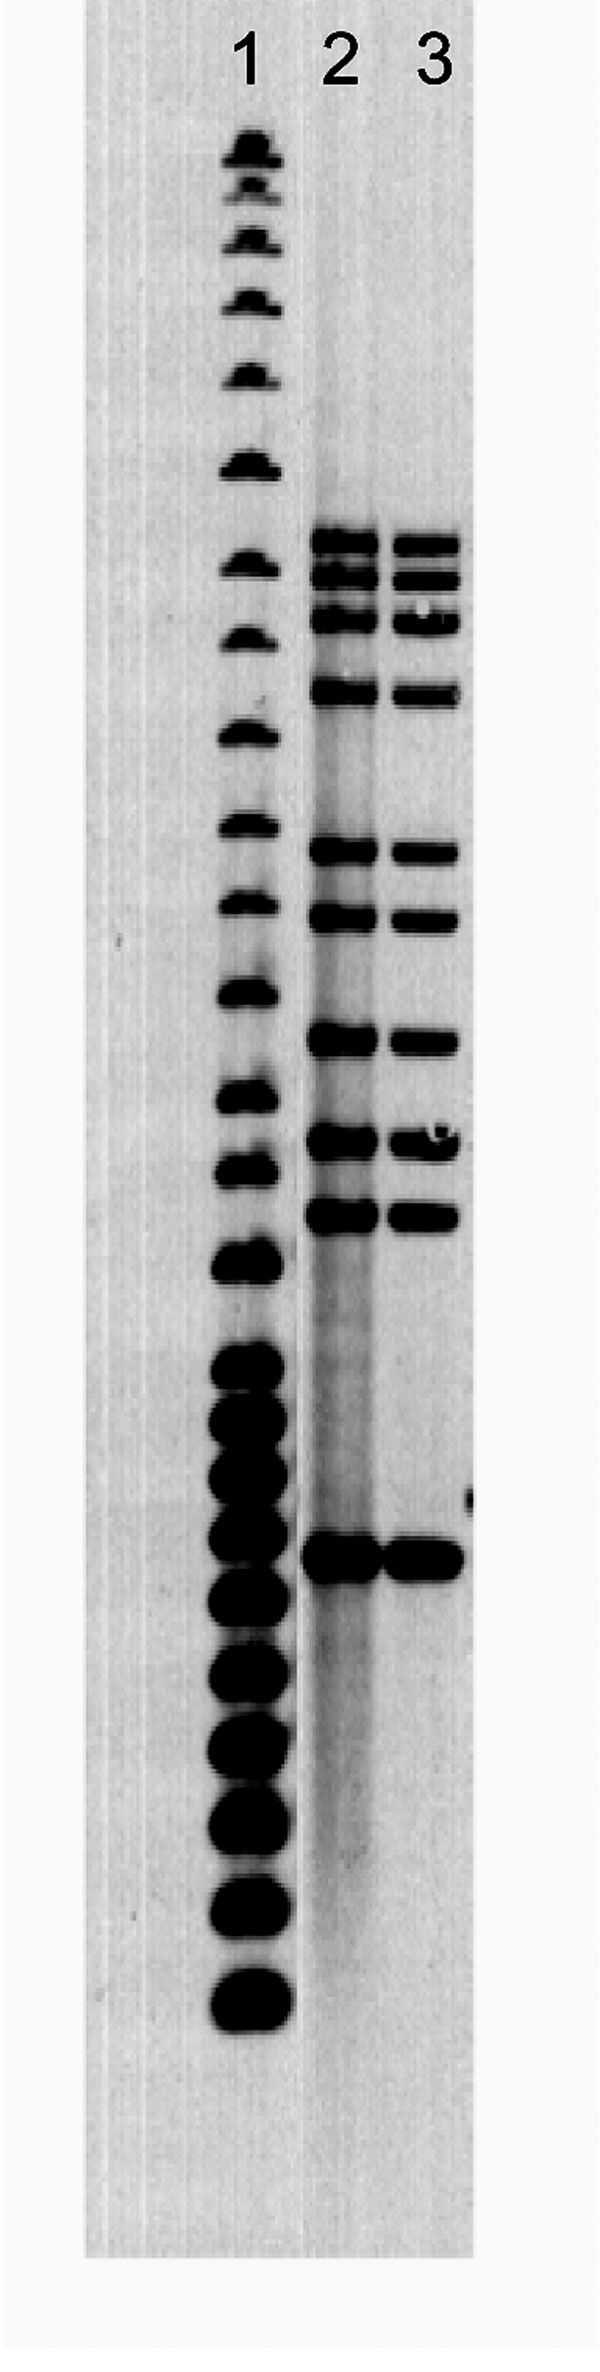 Ten-band Mycobacterium tuberculosis restriction fragment length polymorphism pattern. Lane 1, 25-band Centers for Disease Control and Prevention standard; lane 2, human case; lane 3, canine case.